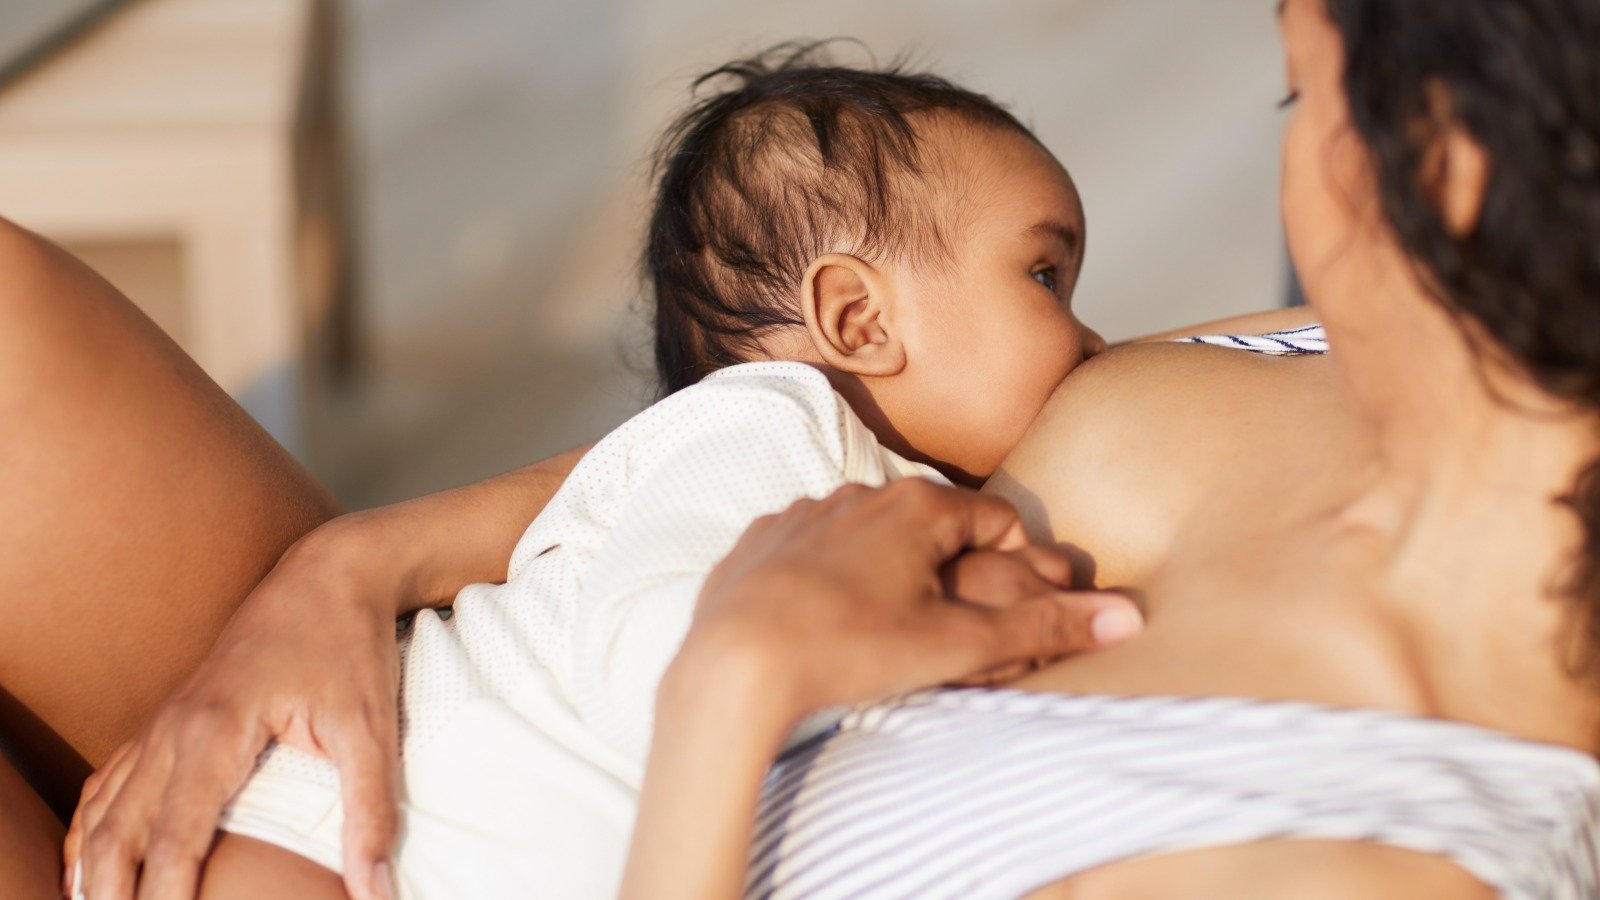 What You Need To Know About Breastfeeding And COVID-19 - Health Digest